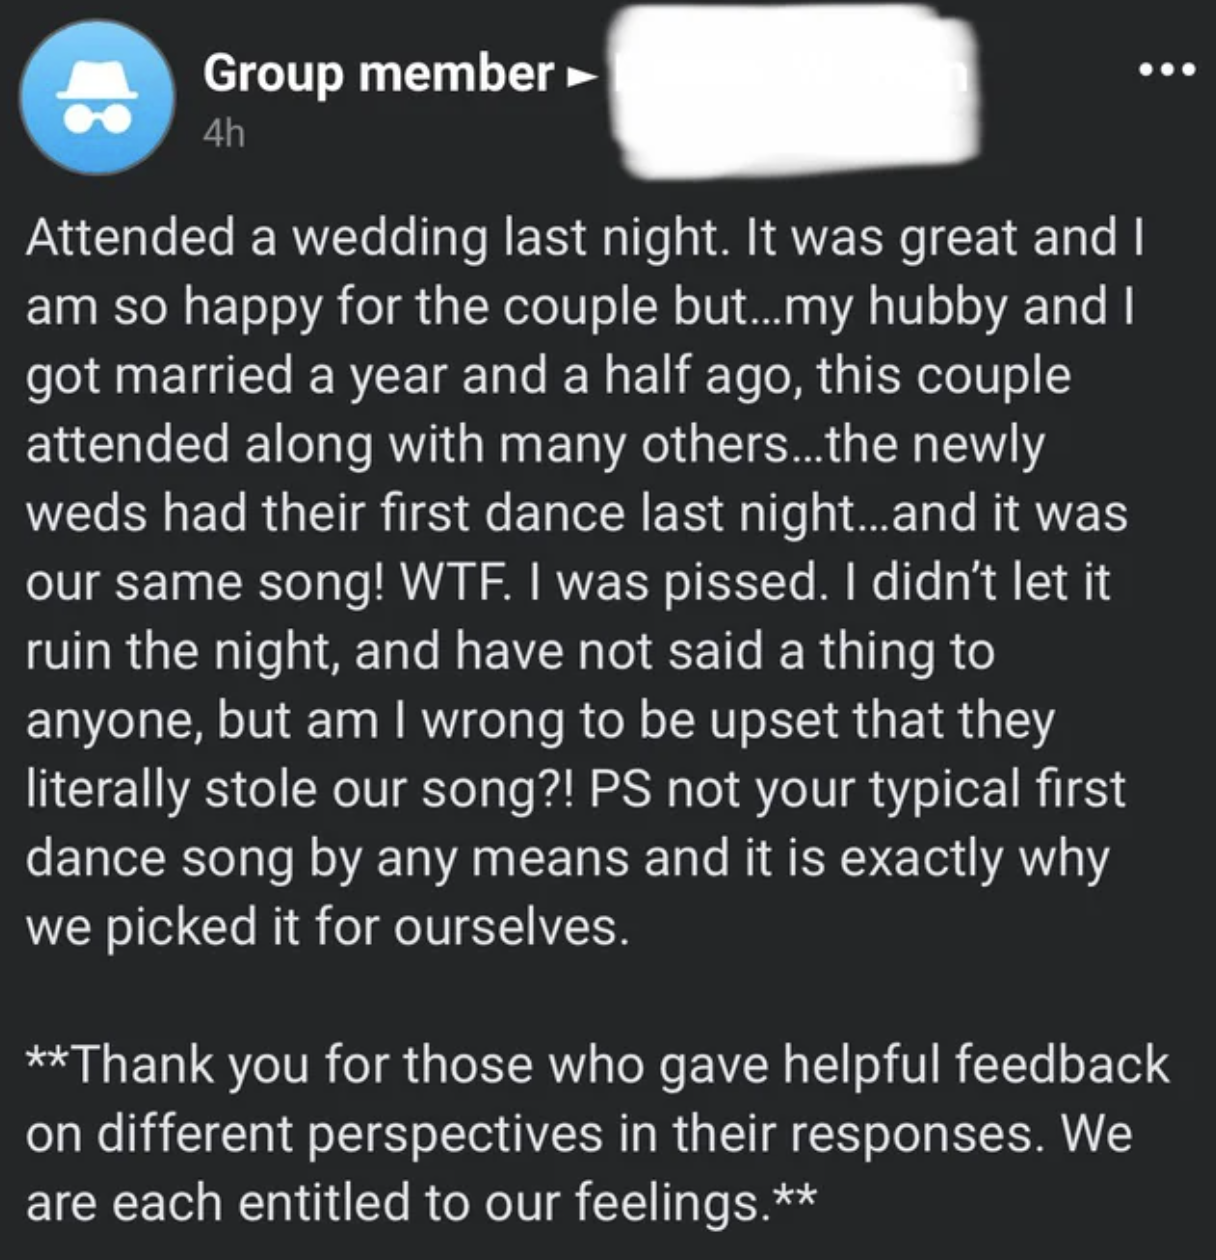 &quot;not your typical first dance song by any means and it is exactly why we picked it for ourselves&quot;